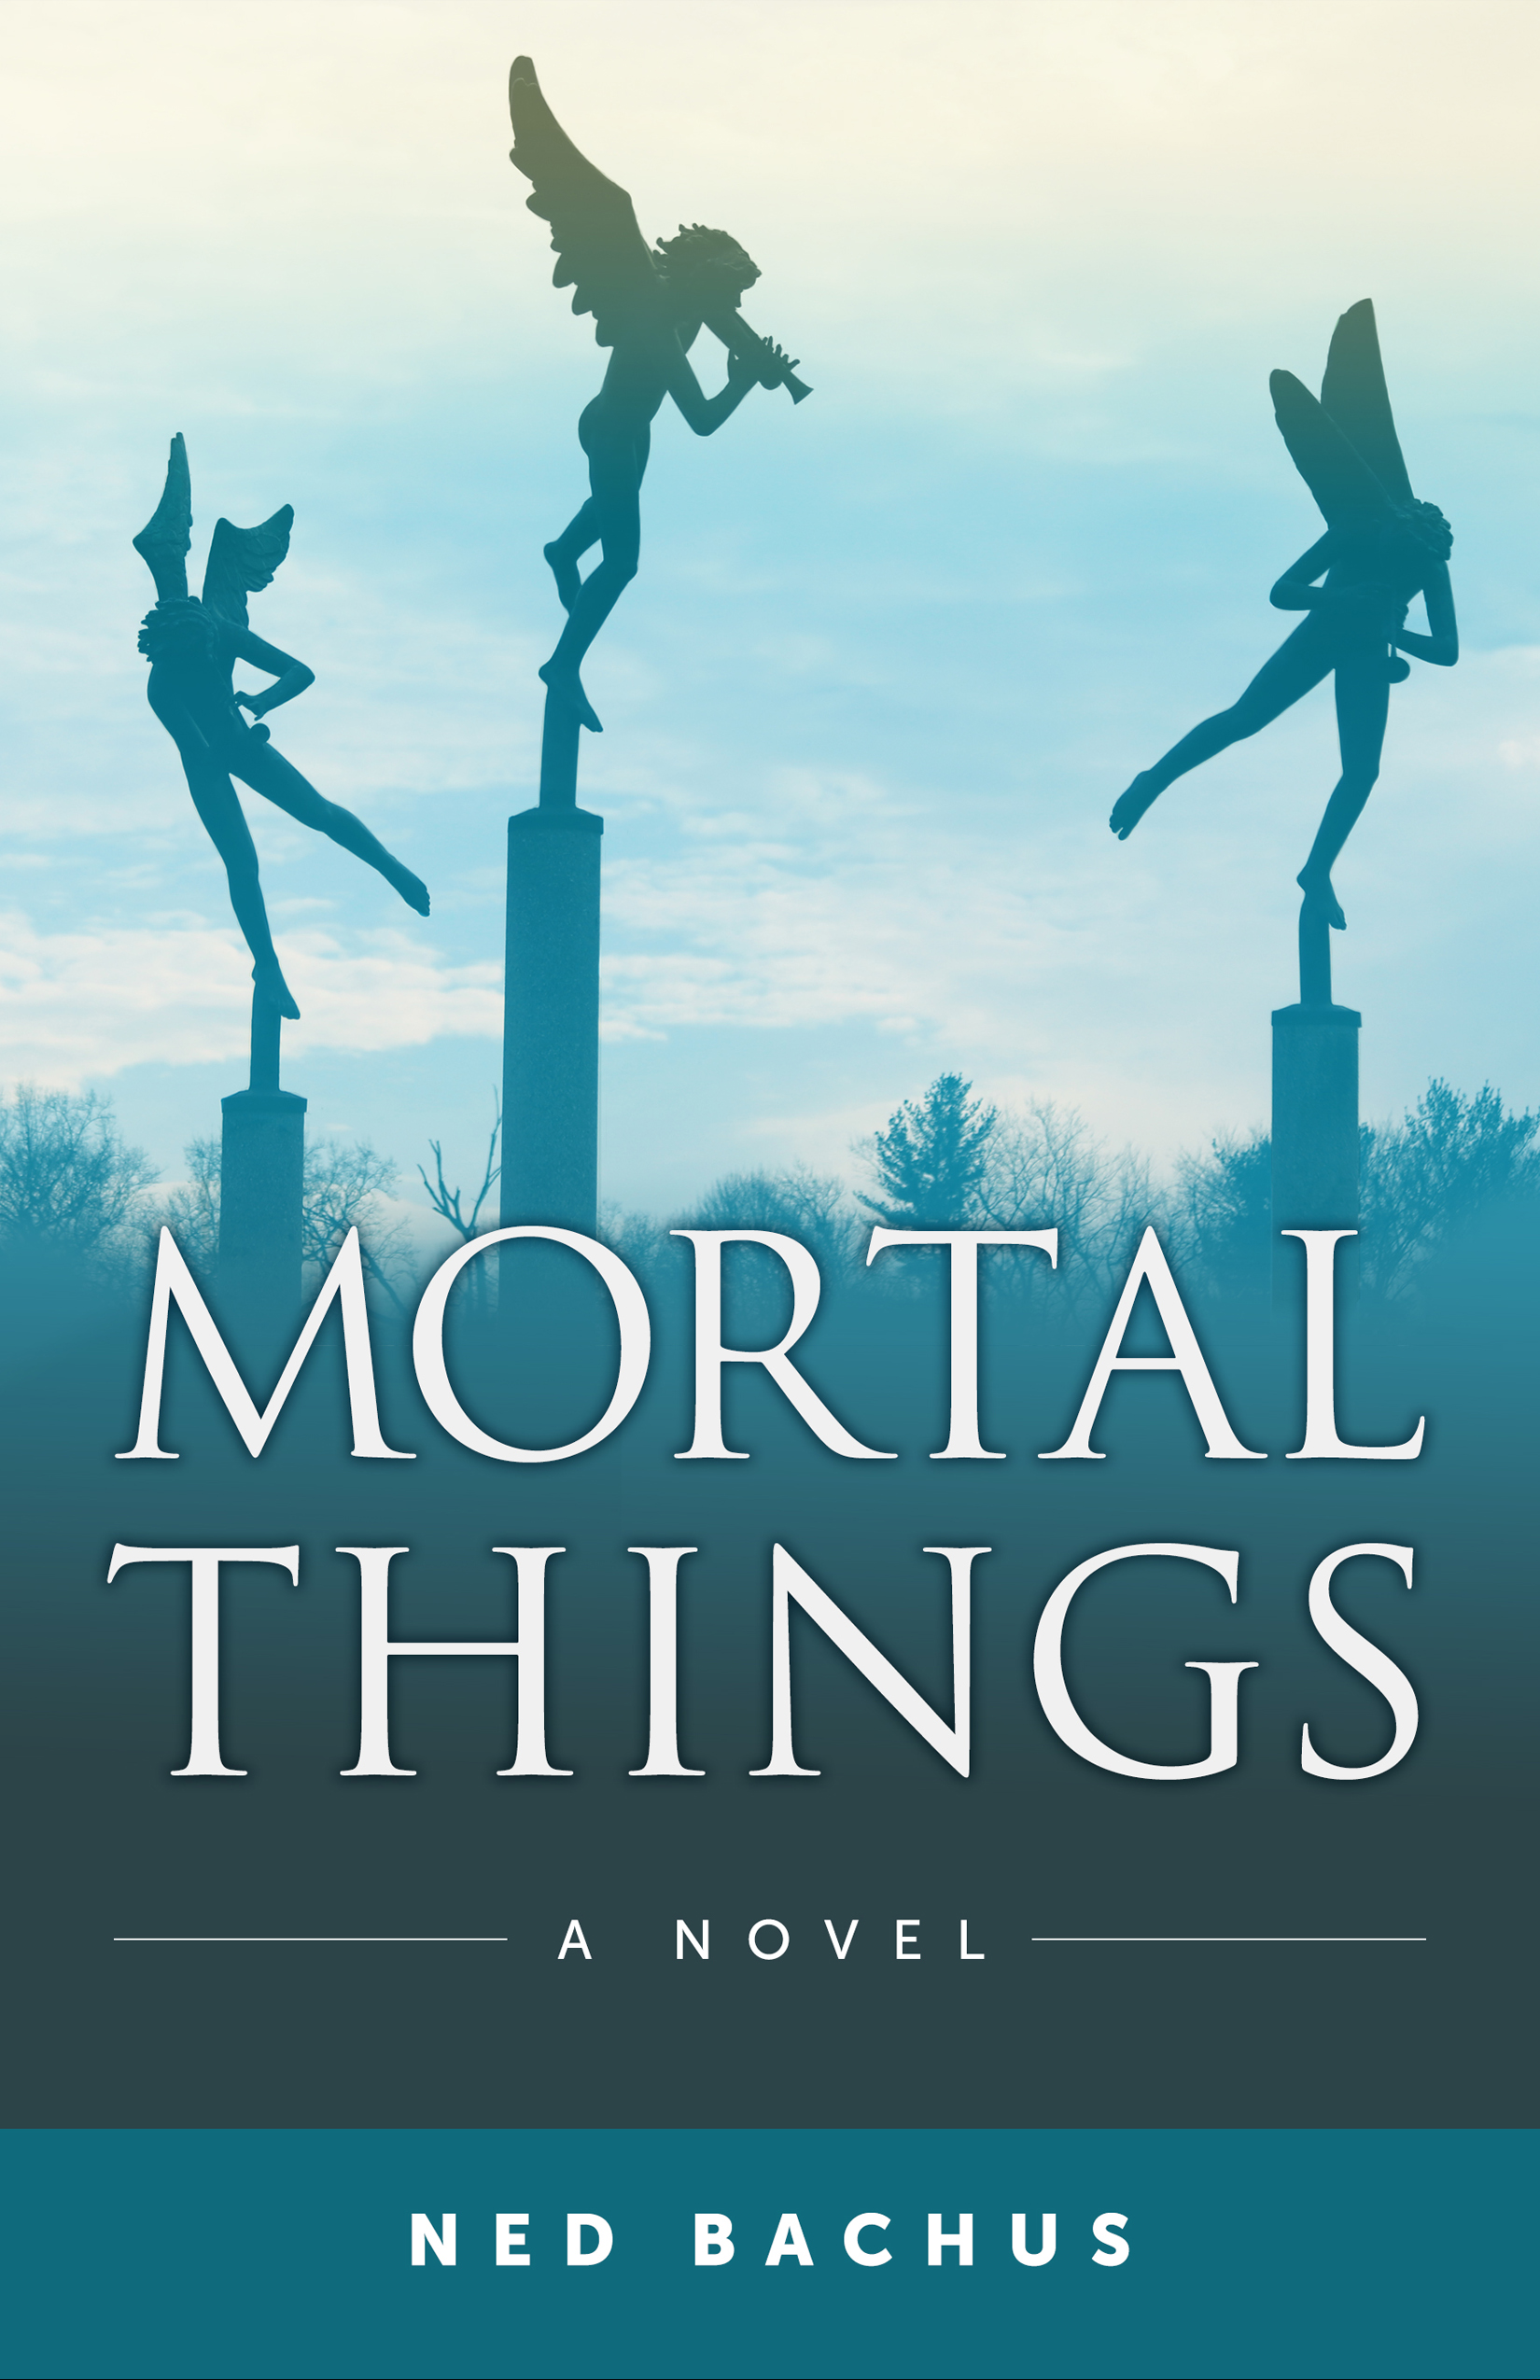 Mortal Things by Ned Bachus